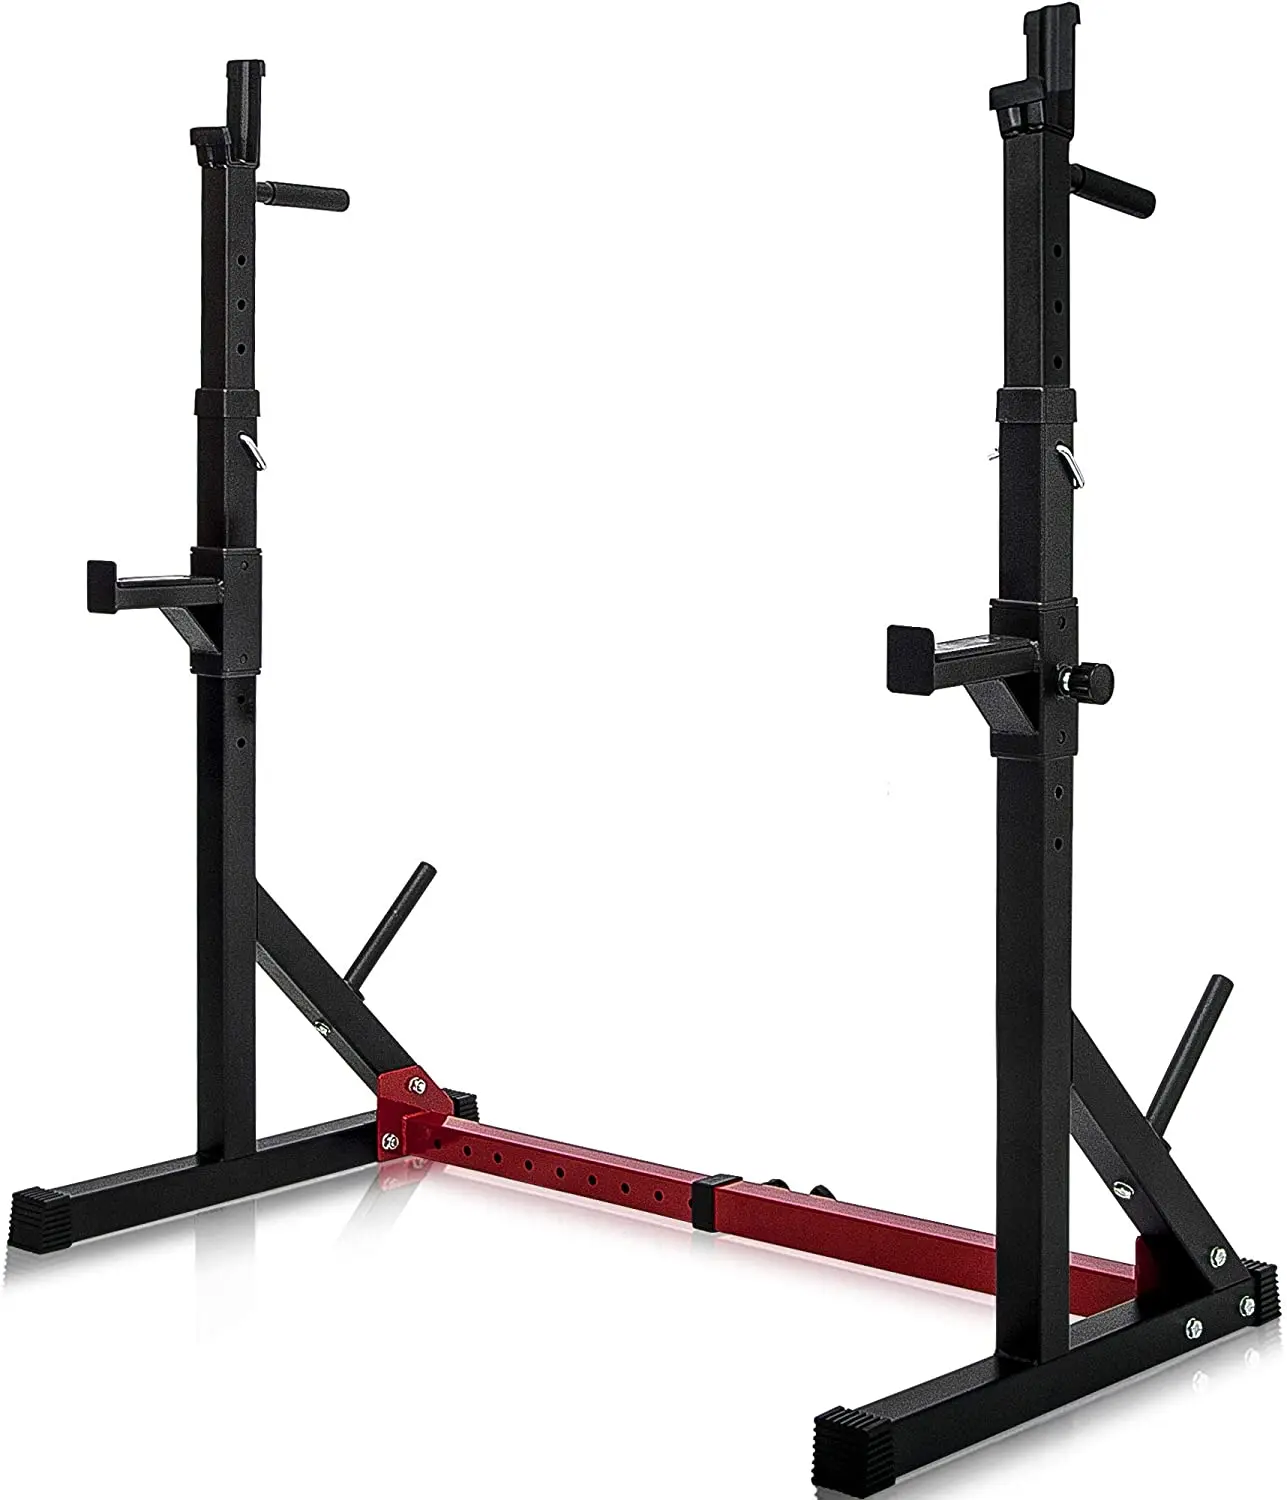 Details about   Barbell Rack 600LBS Max Load Adjustable Squat Stand Dipping Station Weight Bench 